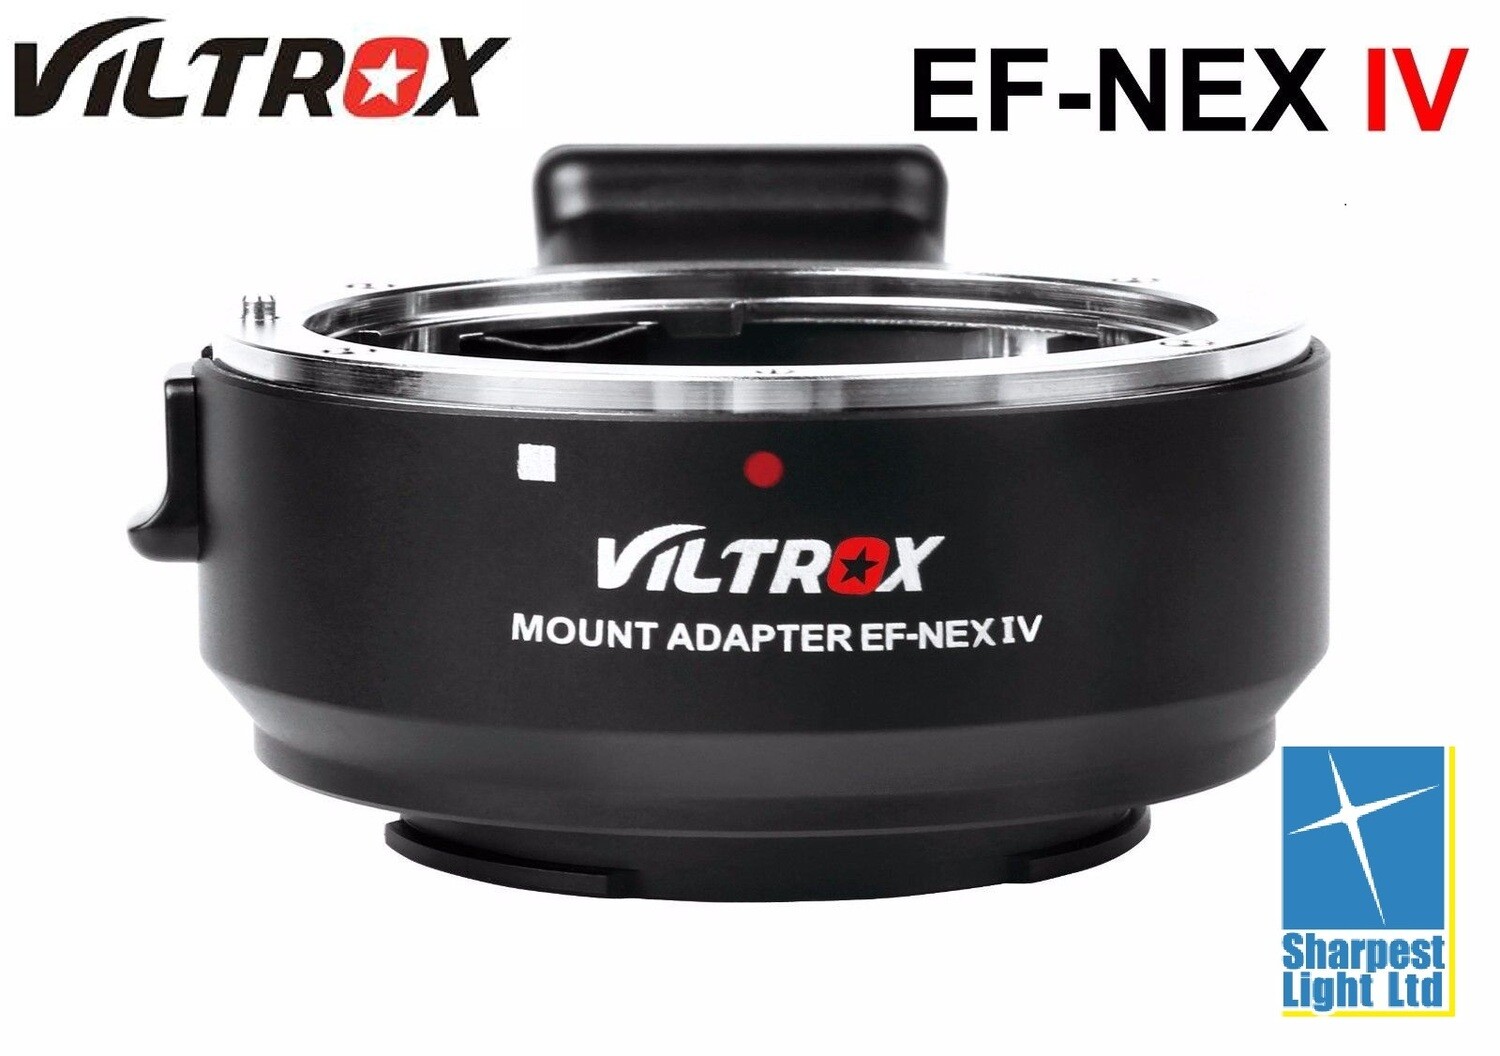 VILTROX EF-NEX IV High Speed Auto Focus Lens Mount Adapter Ring for Canon EF/EF-S Lens to Camera Sony A9 A7 A7R A6300 A6500 NEX Series Full-Frame with USB Upgrade Port CDAF and PDAF Switch Mode.